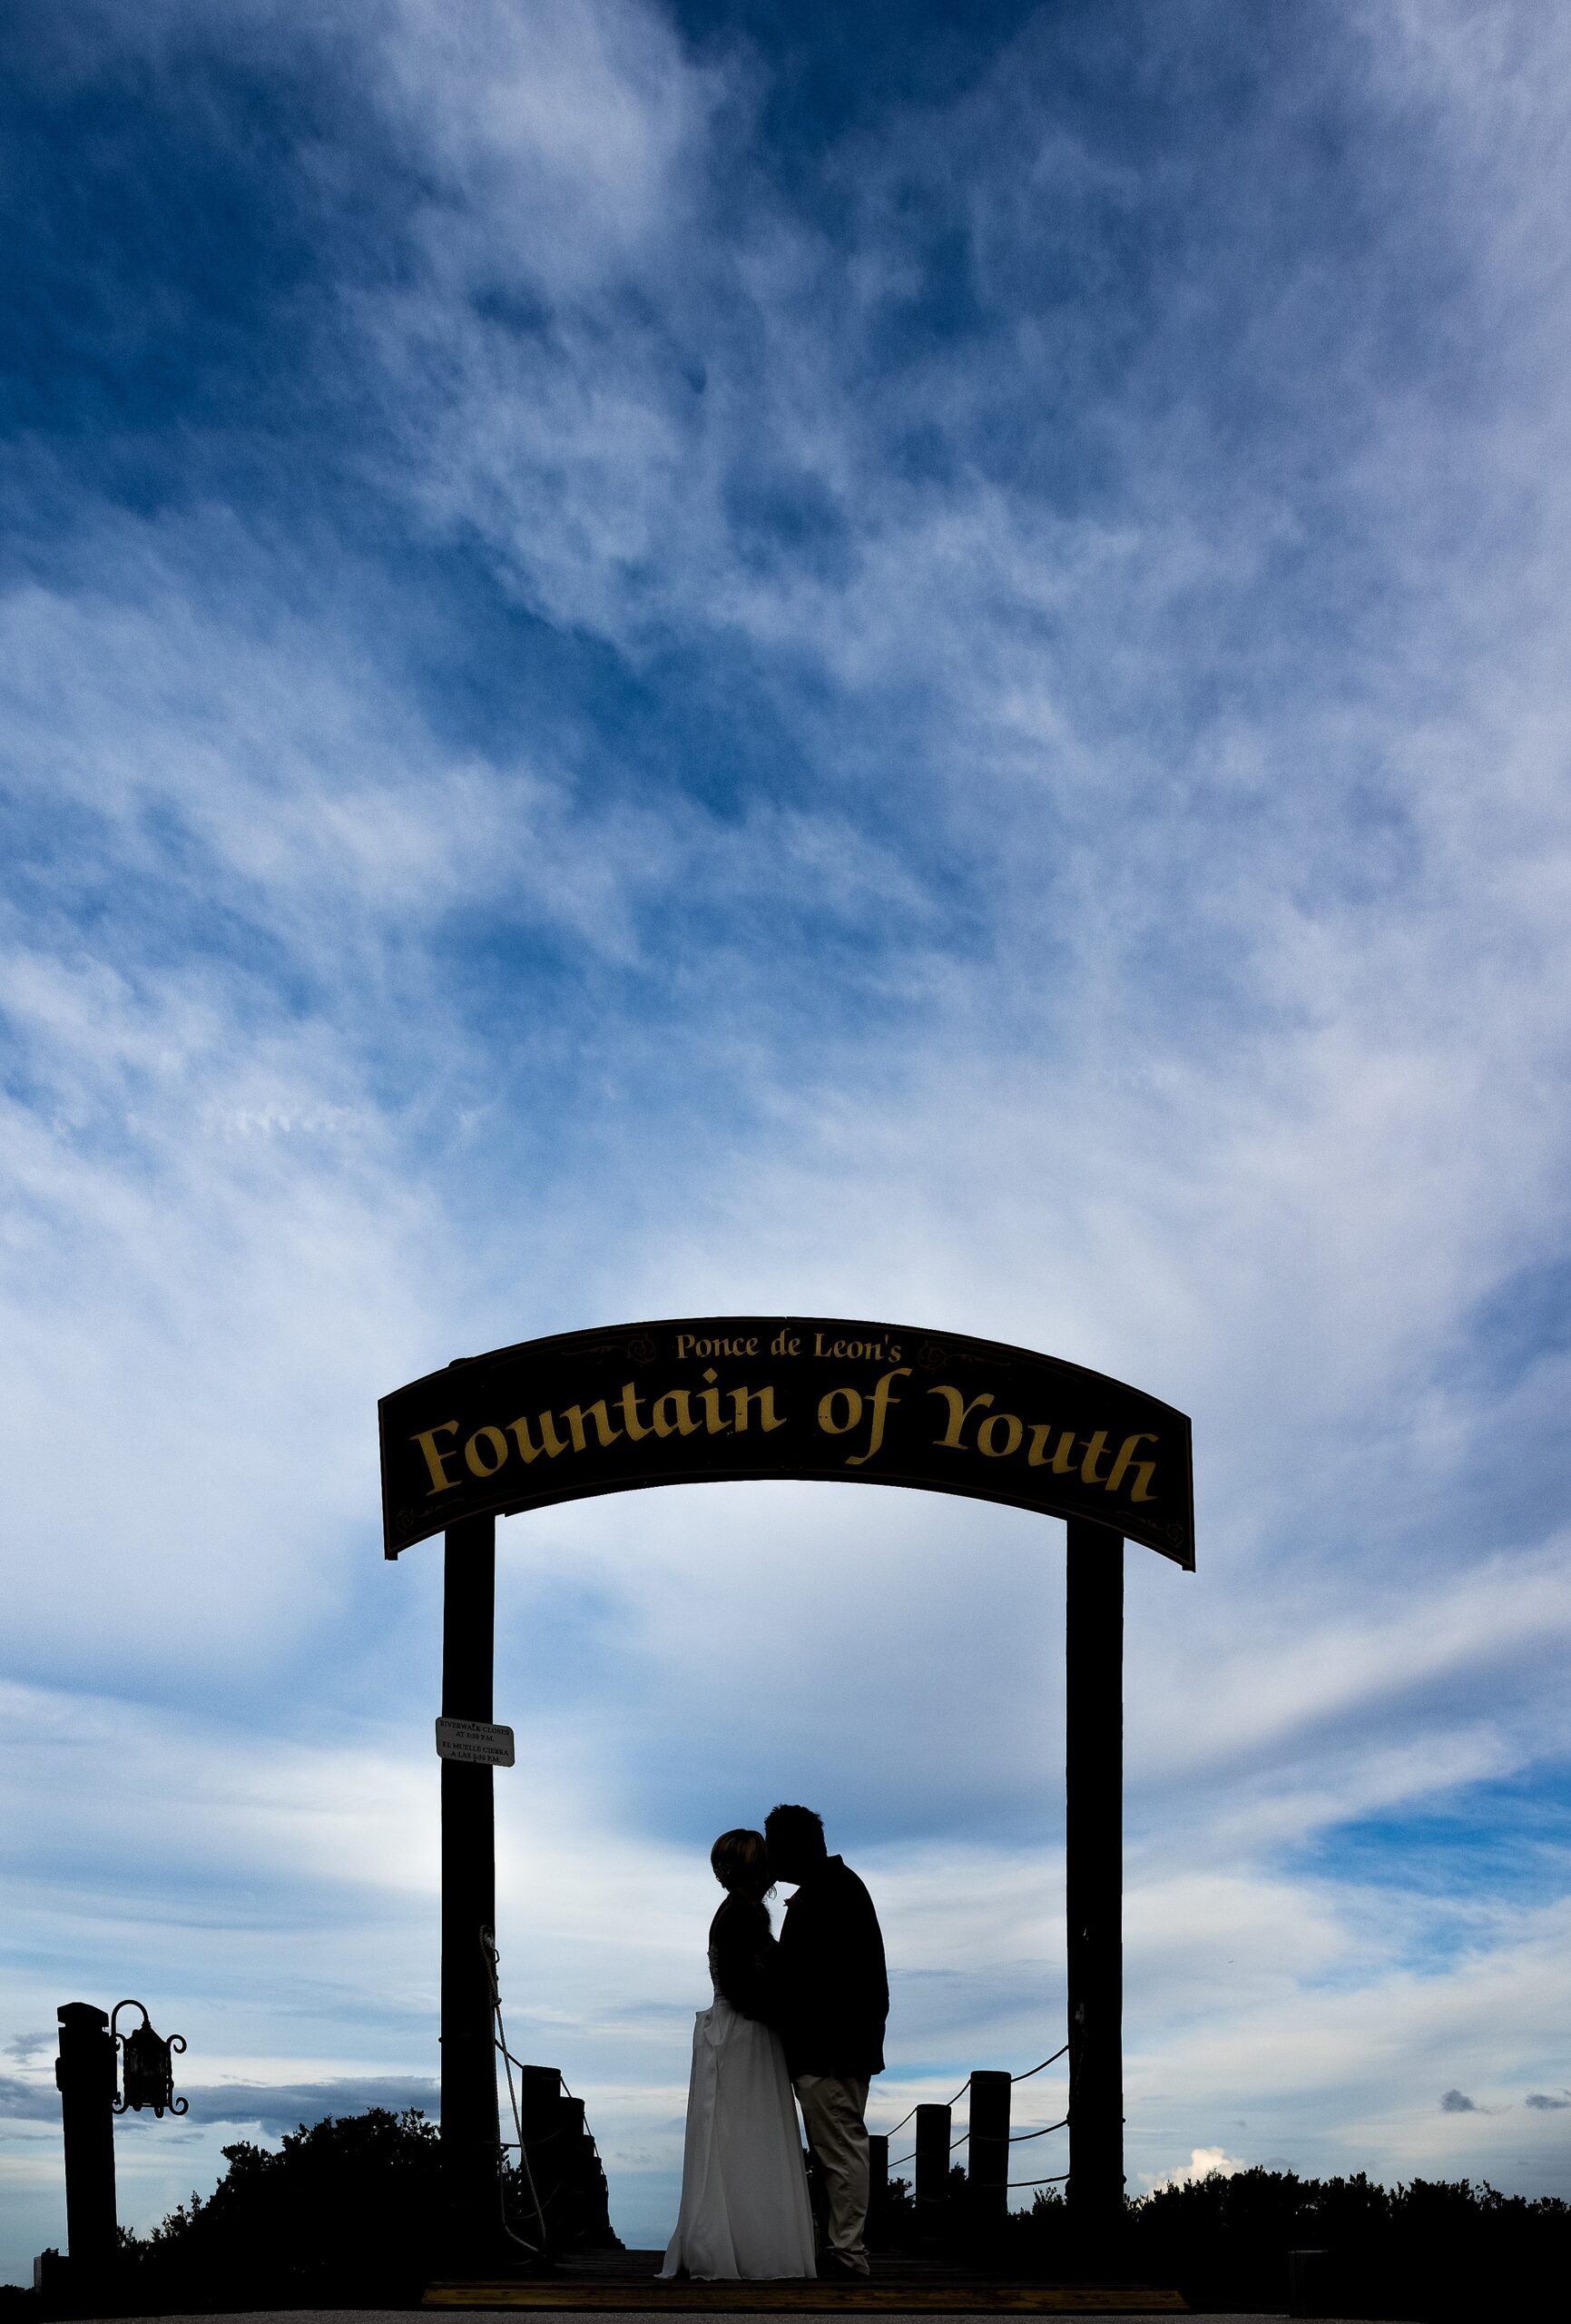 Newlyweds kiss in silhouette under the sign at their fountain of youth wedding